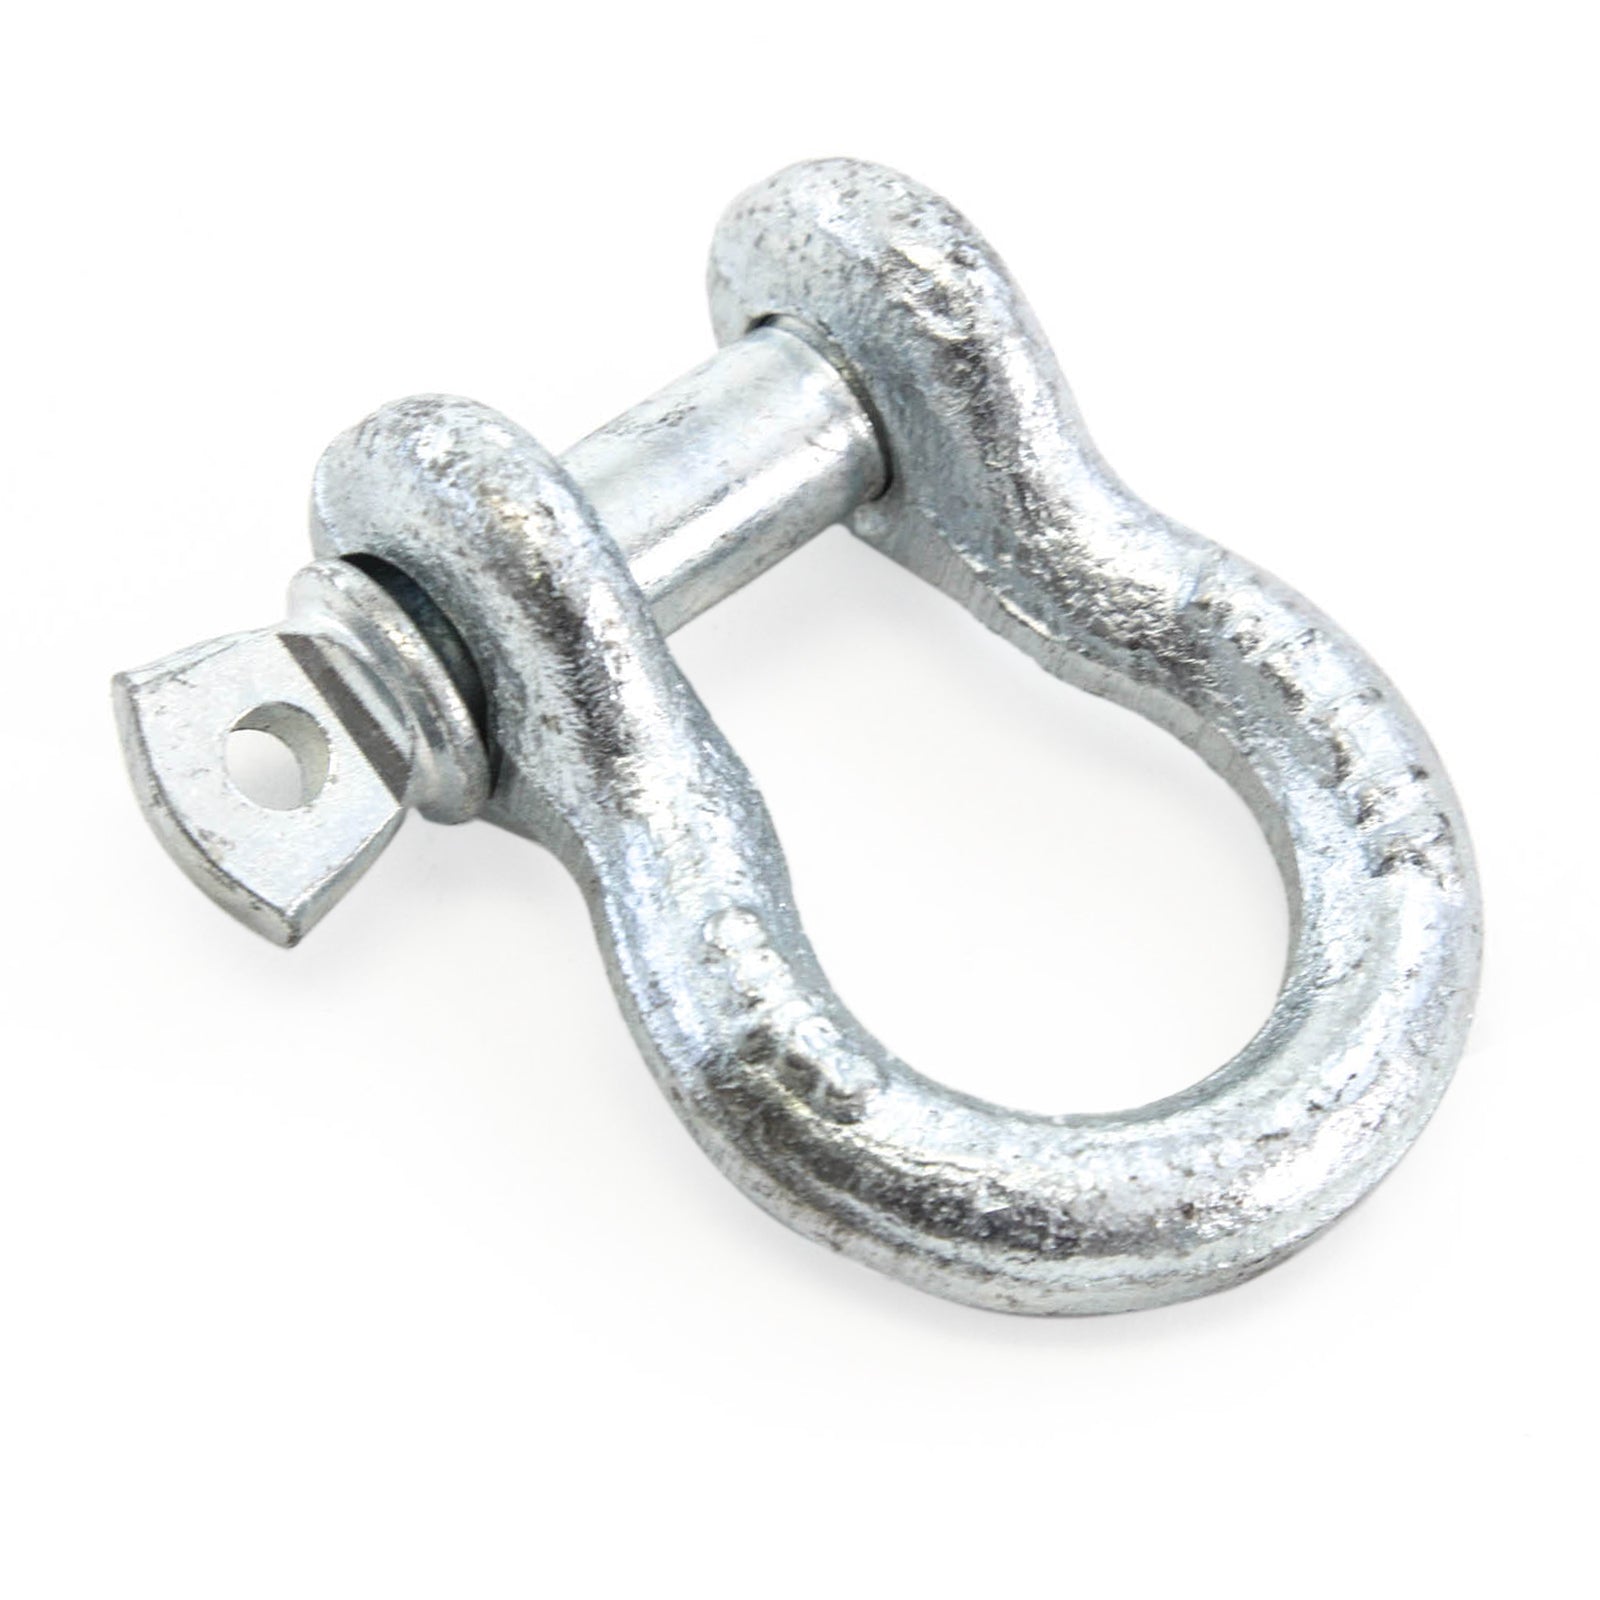 Red Hound Auto 3/8 10mm Rig Rigging Clevis Shackle .75 Ton Screw Pin